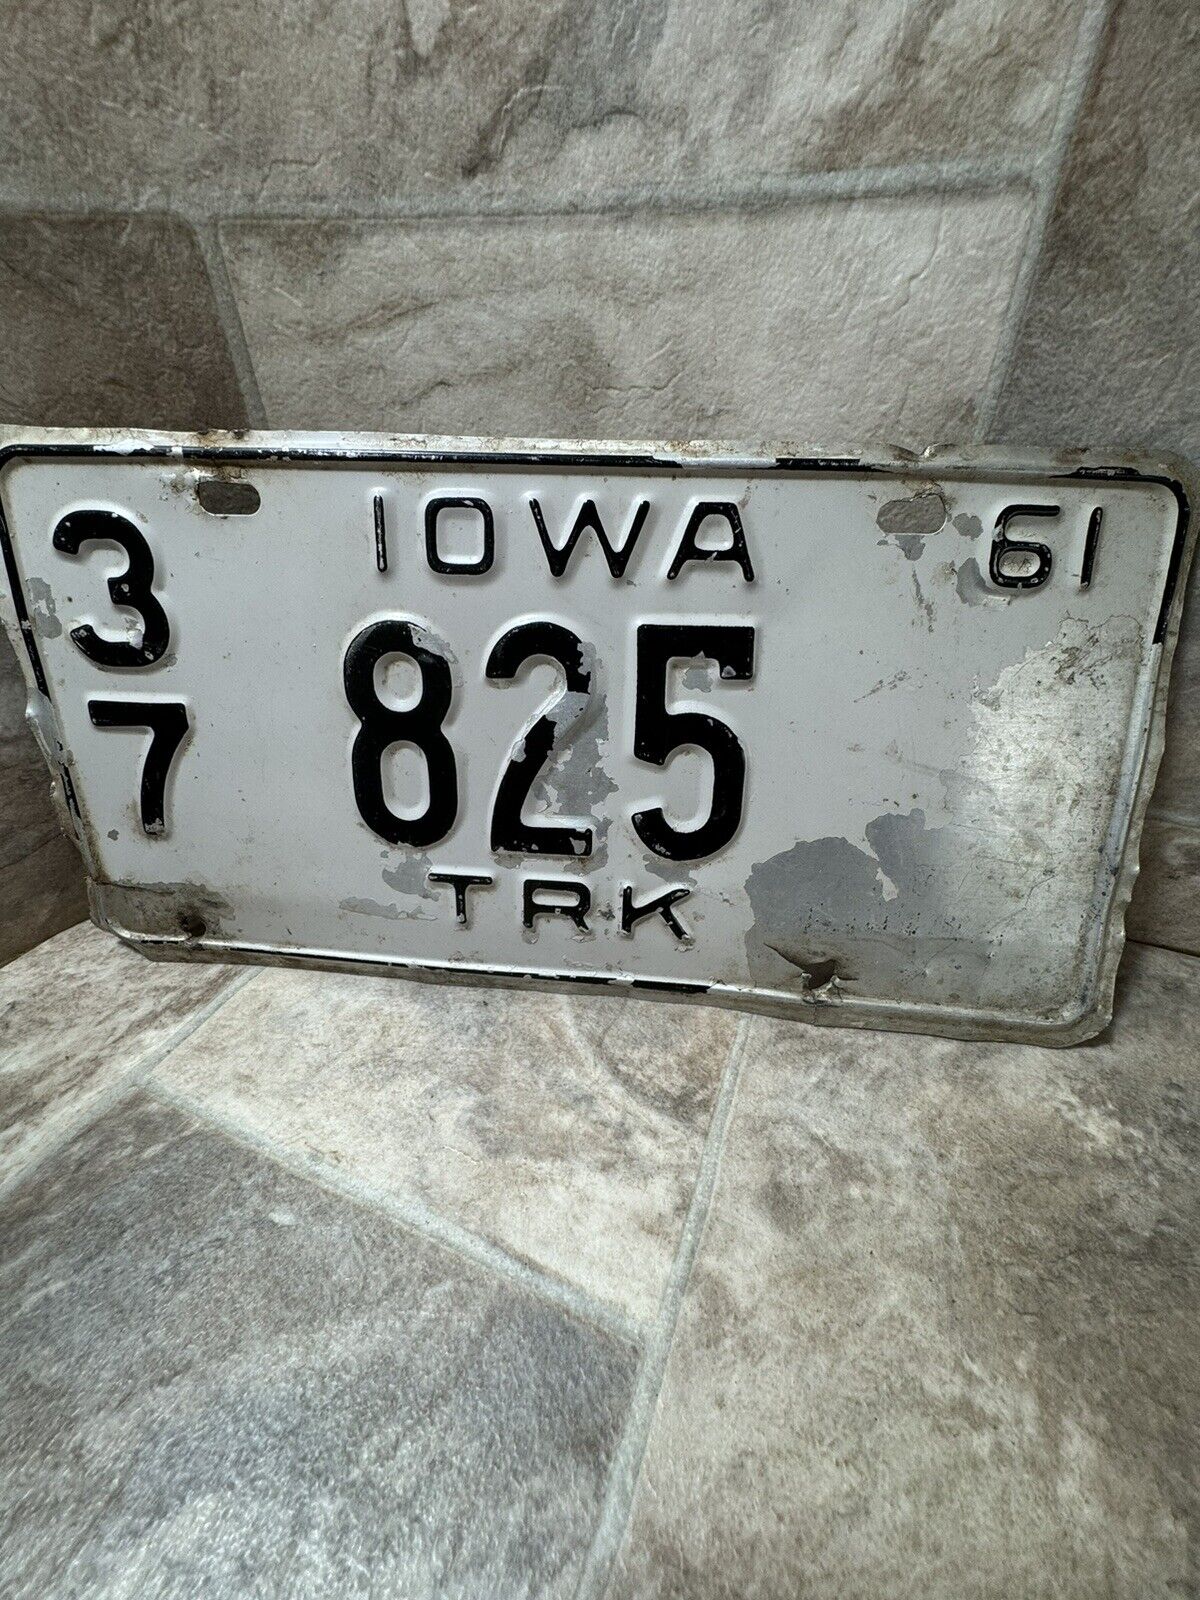 Vintage 1937 Iowa TRK License Plate White Black, Distressed With Patina, See Pic